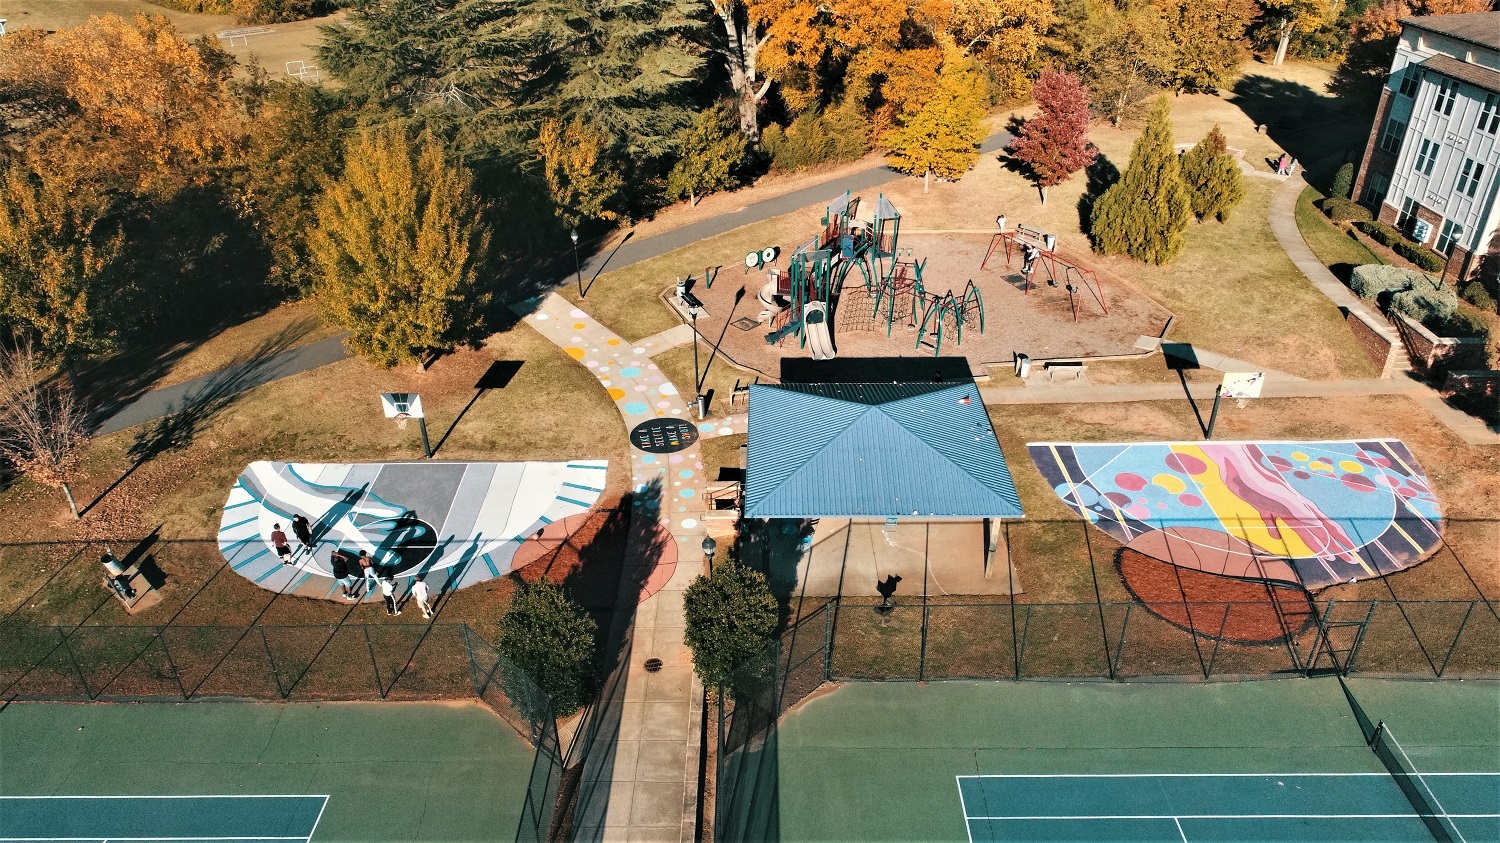 drone image of park